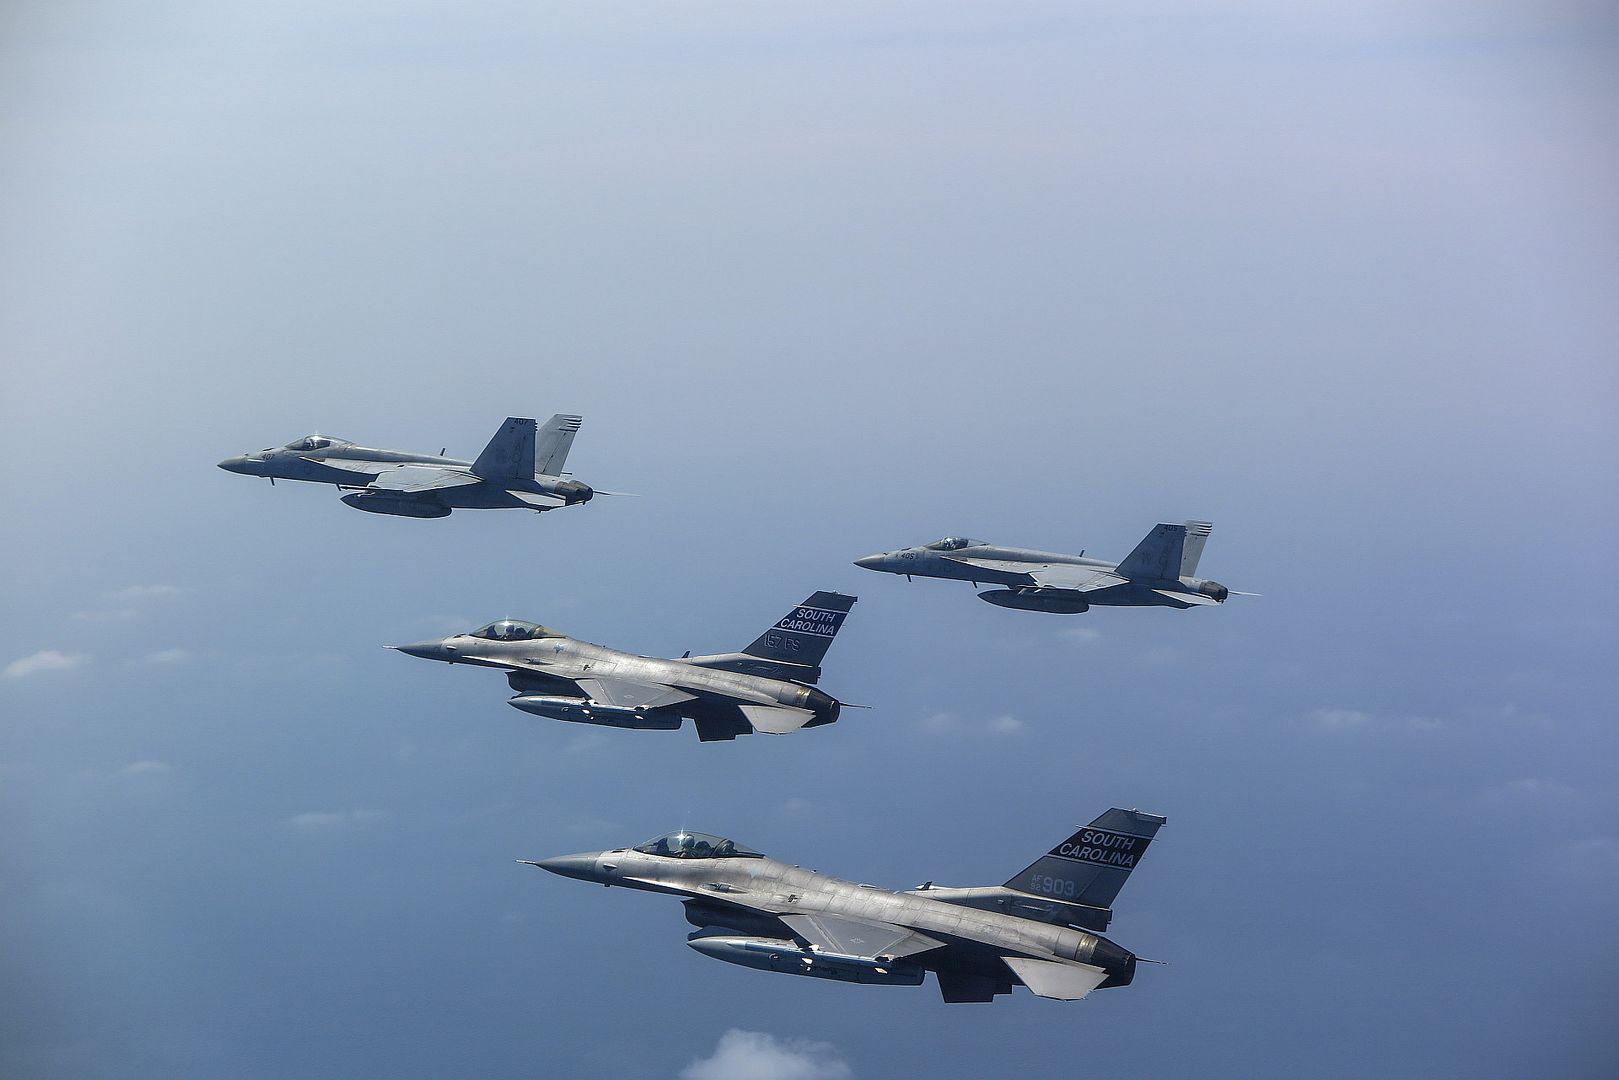 16 Fighting Falcon Fighter Jets From The 169th Fighter Wing Over The Arabian Sea